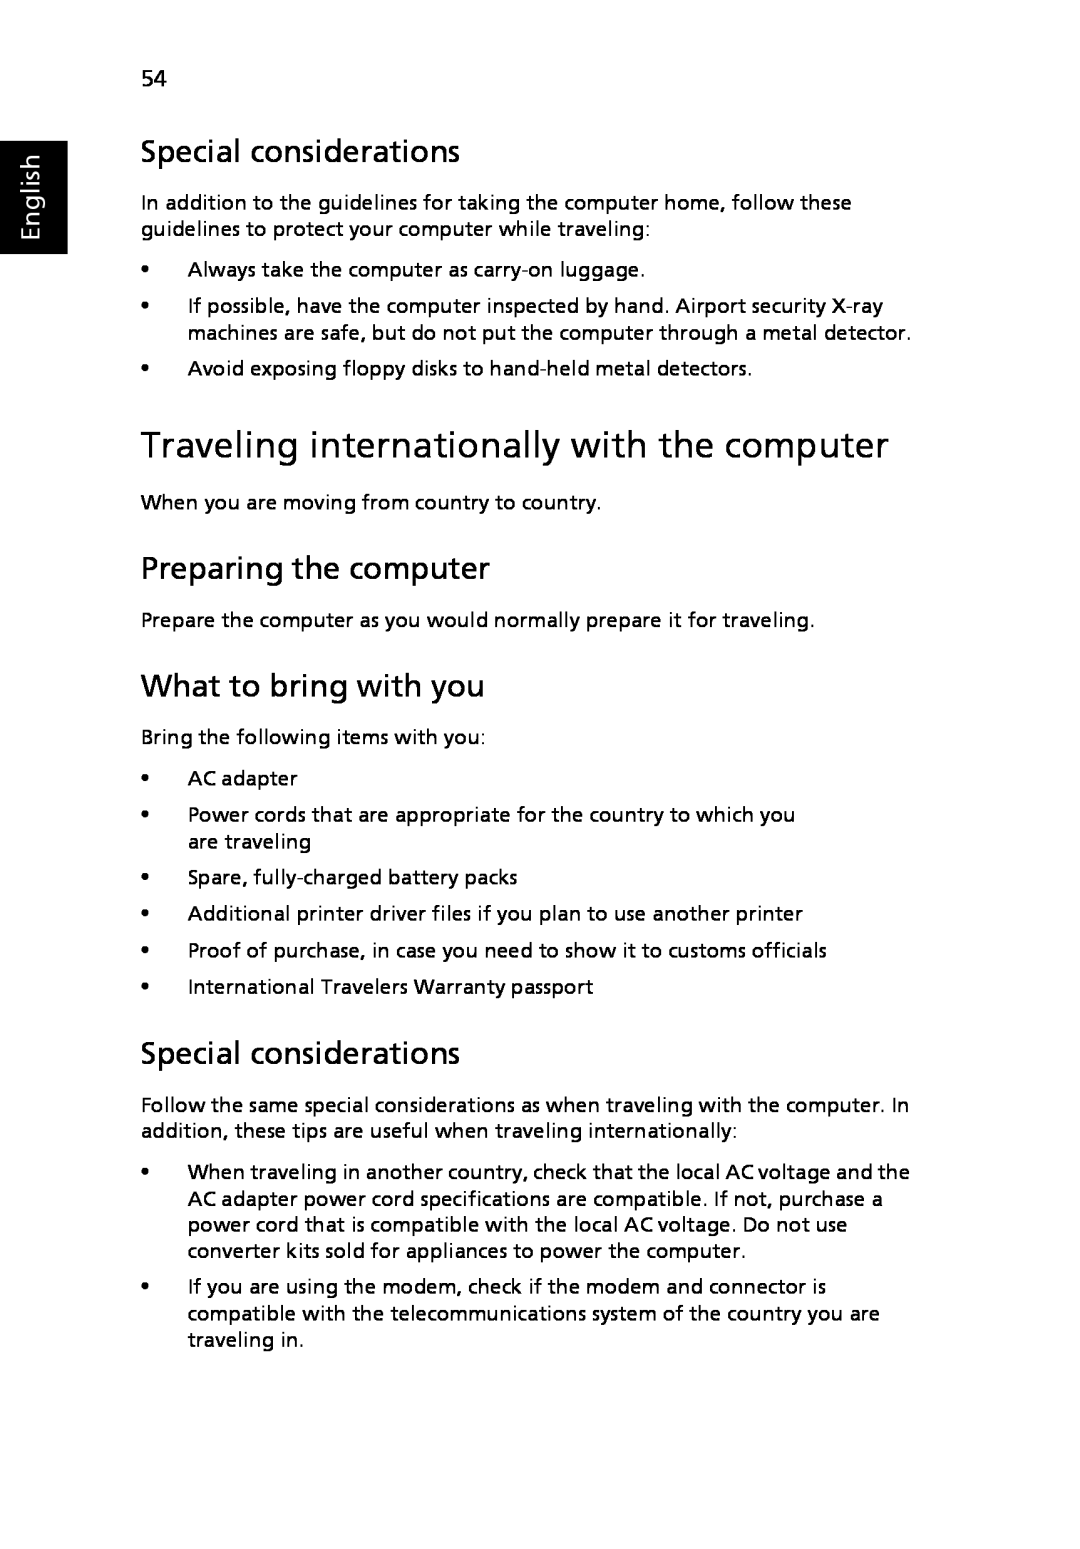 Acer 3030 Series Traveling internationally with the computer, What to bring with you, Special considerations, English 